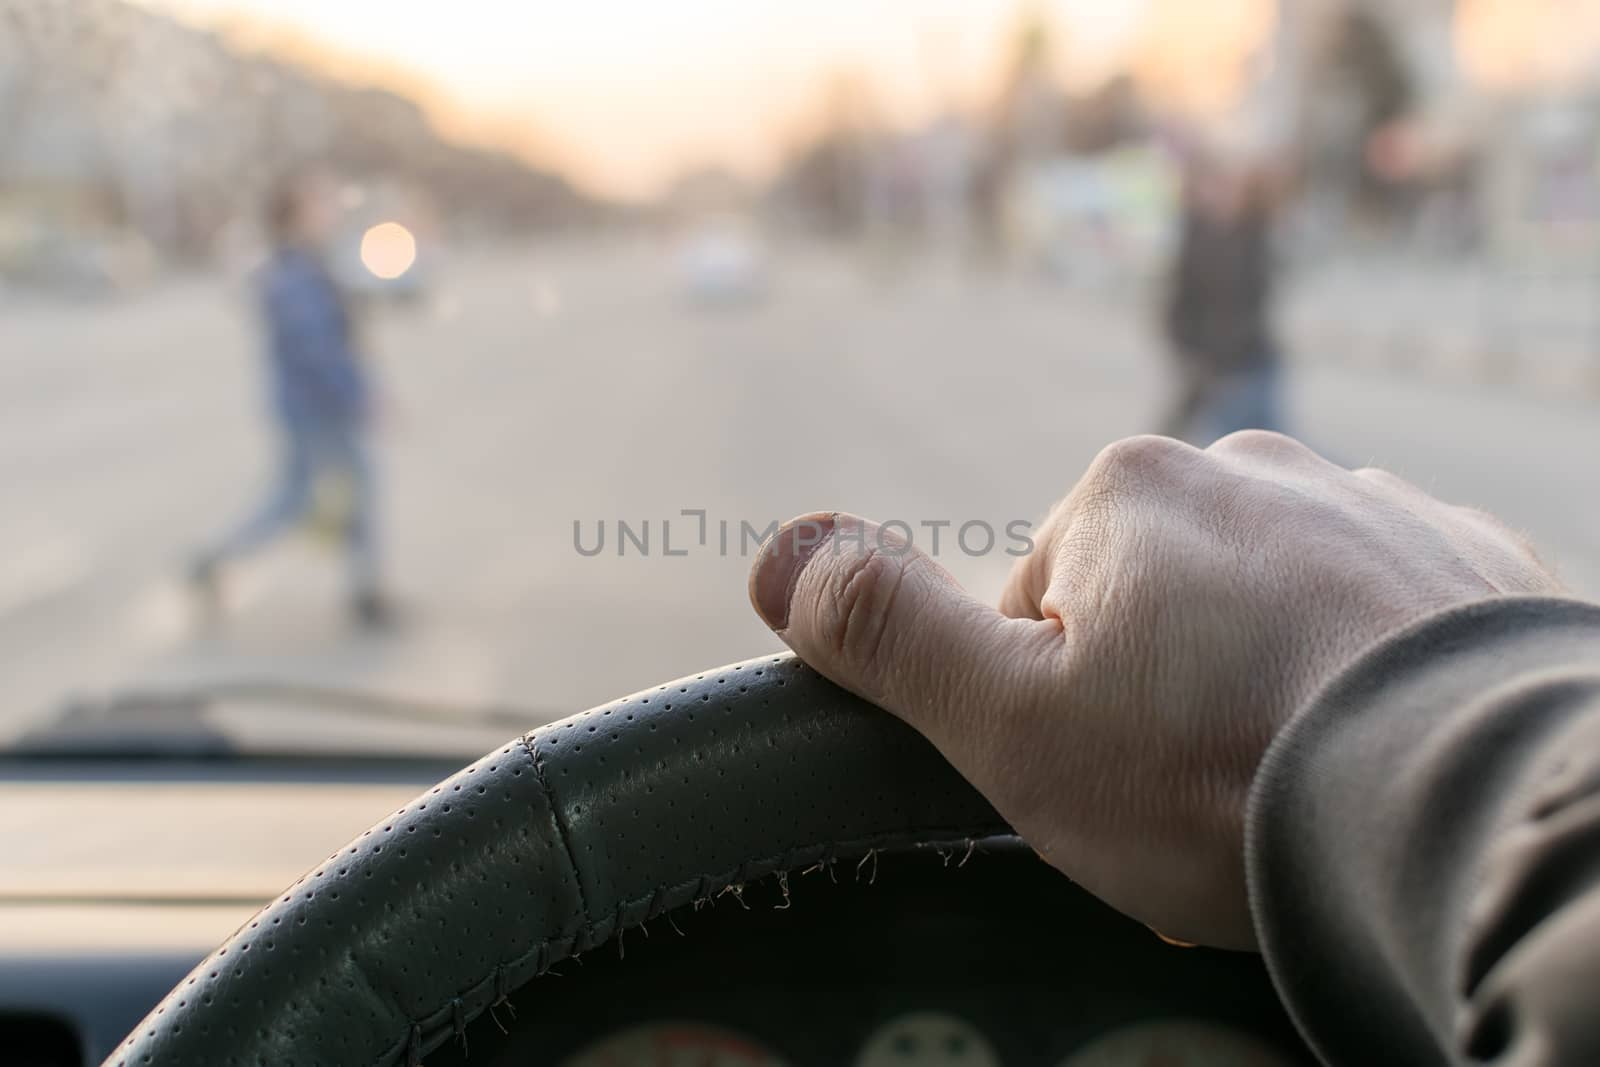 view from the car, the man's hand on the steering wheel of the car, located opposite the pedestrian crossing and pedestrians crossing the road